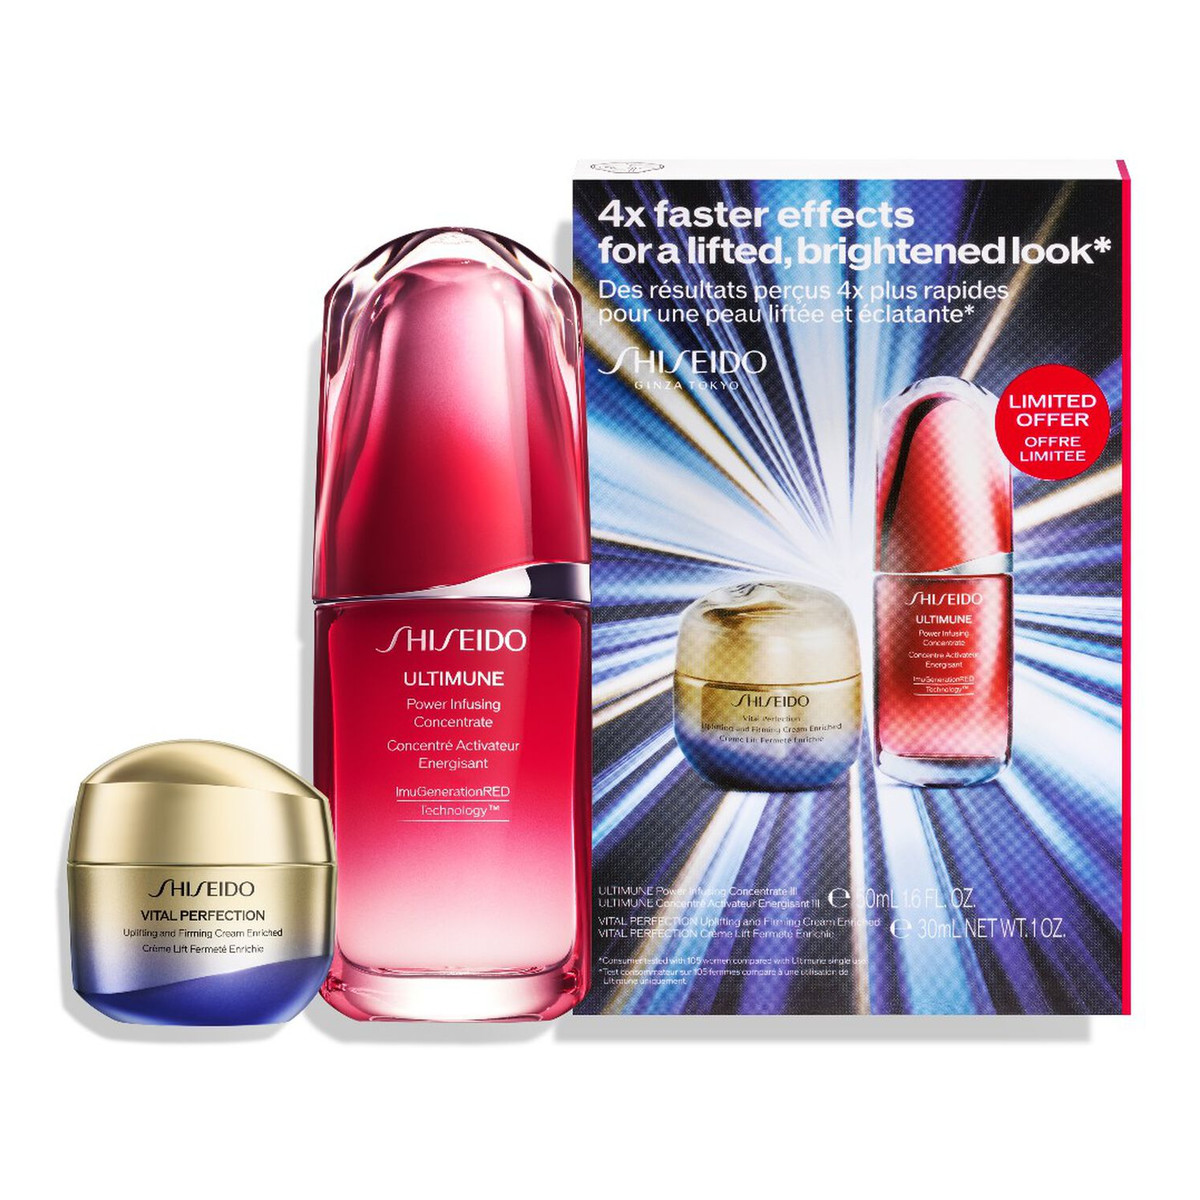 Shiseido Zestaw Power Uplifting and Firming Set Vital Perfection Uplifting & Firming Cream Enriched + Ultimate Power Infusing Concentrate